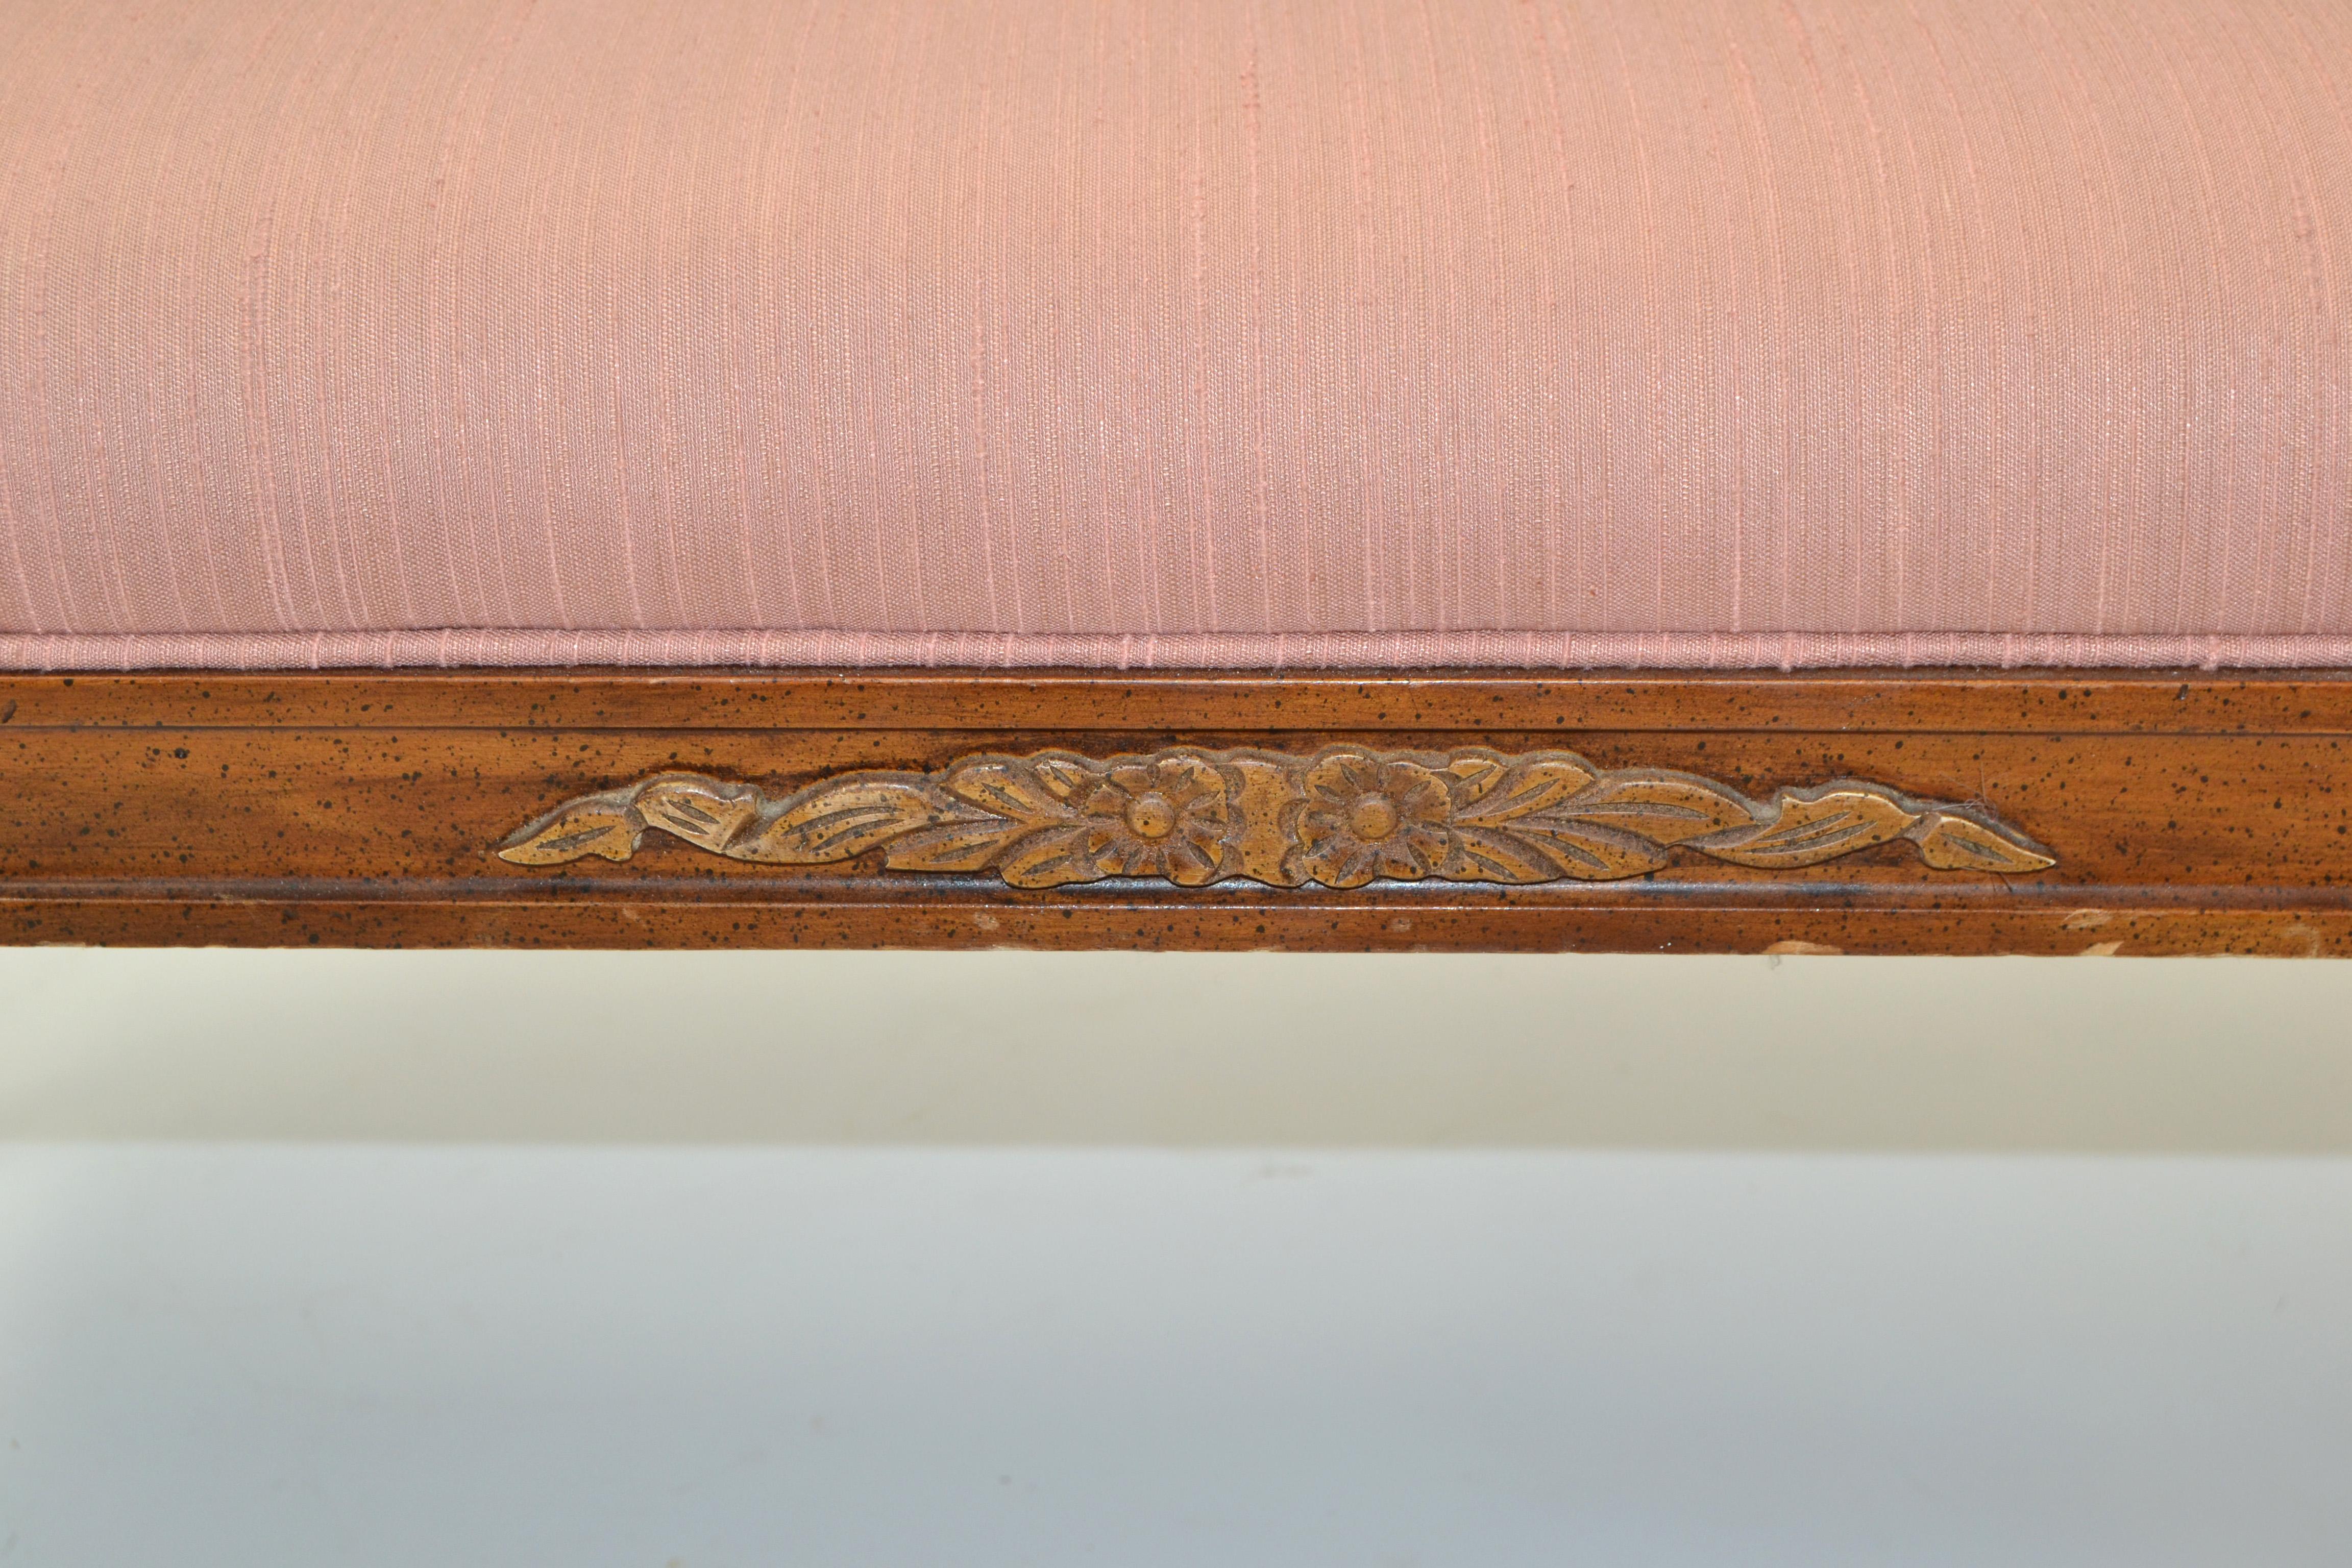 Hollywood Regency Oak Classic Bench Turned Legs & Carved Decor Handwoven Cane    In Good Condition For Sale In Miami, FL